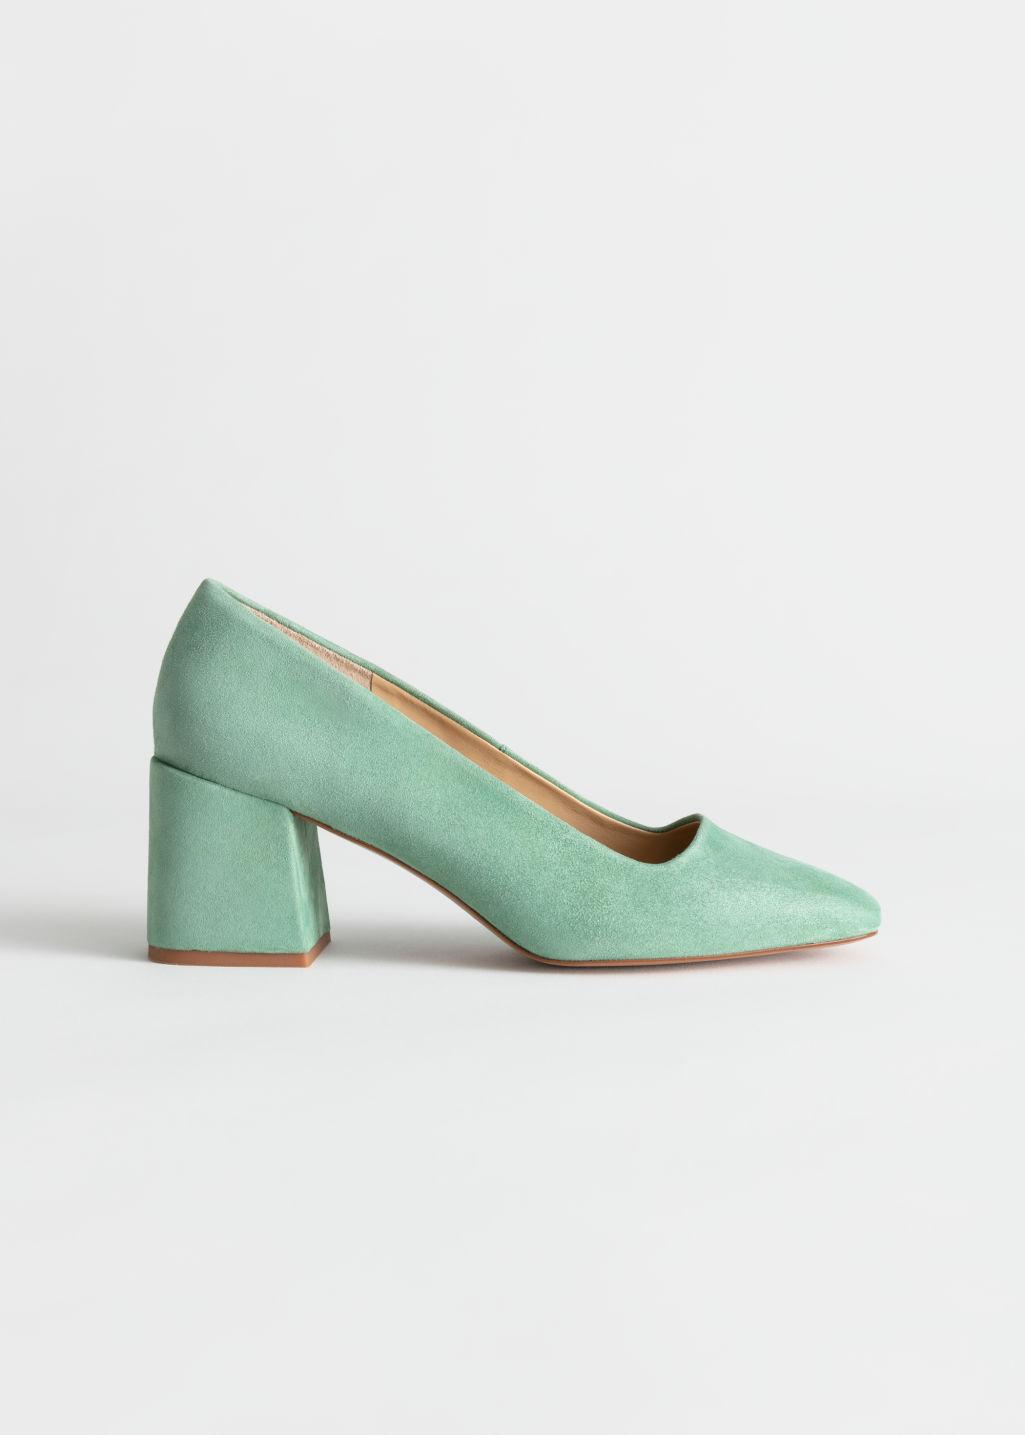 Other Stories Suede Heeled in Green - Lyst